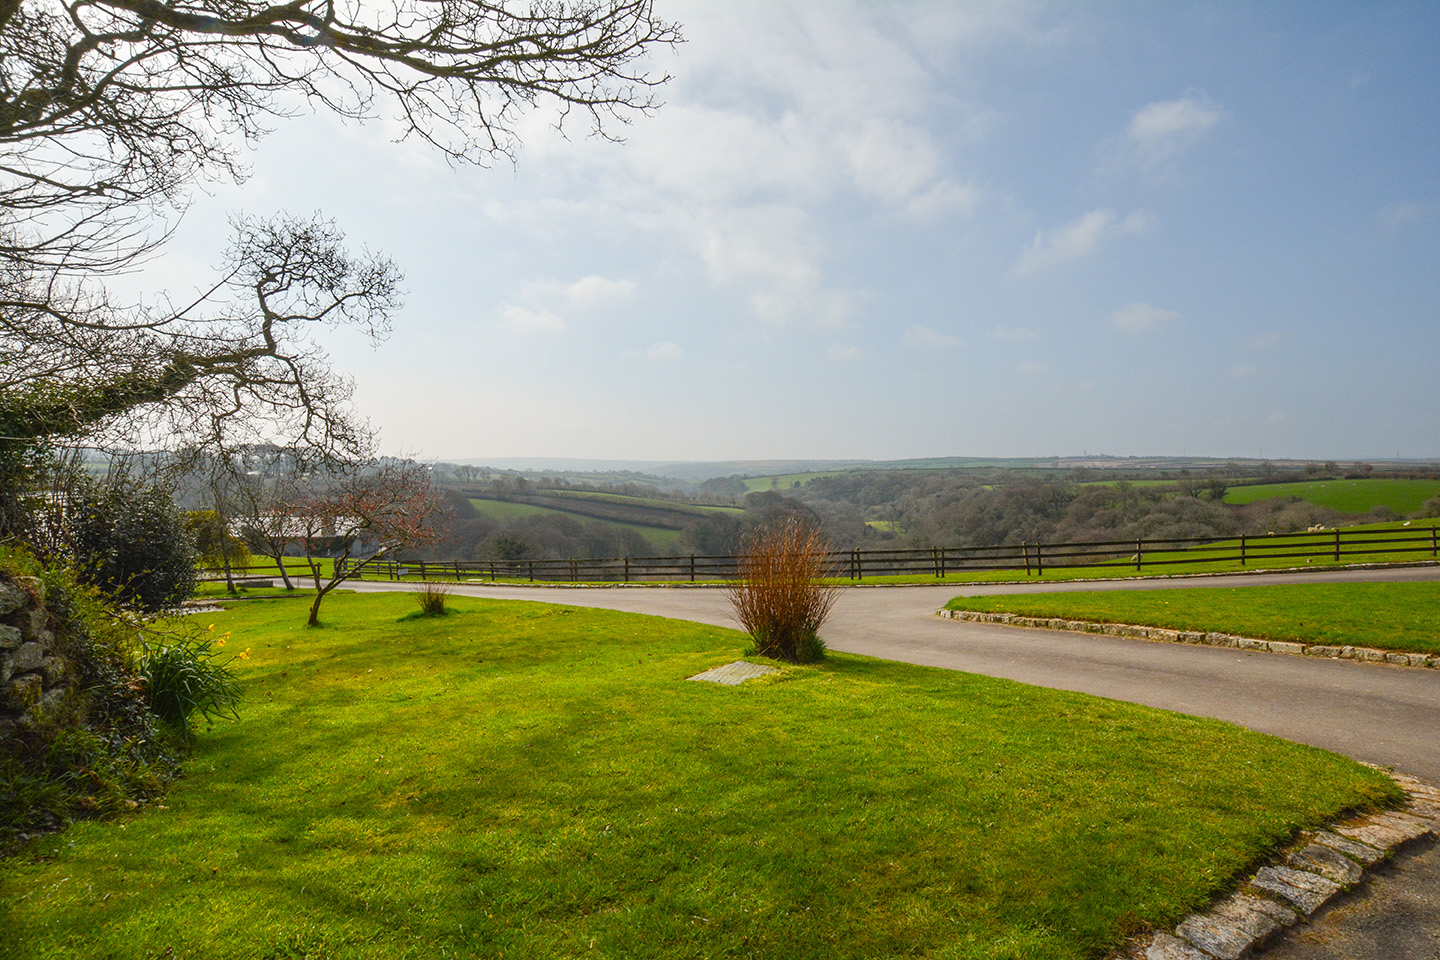 The view from Jingles luxury self catering holiday cottage at Penrose Burden in North Cornwall near Bodmin Moor03.jpg